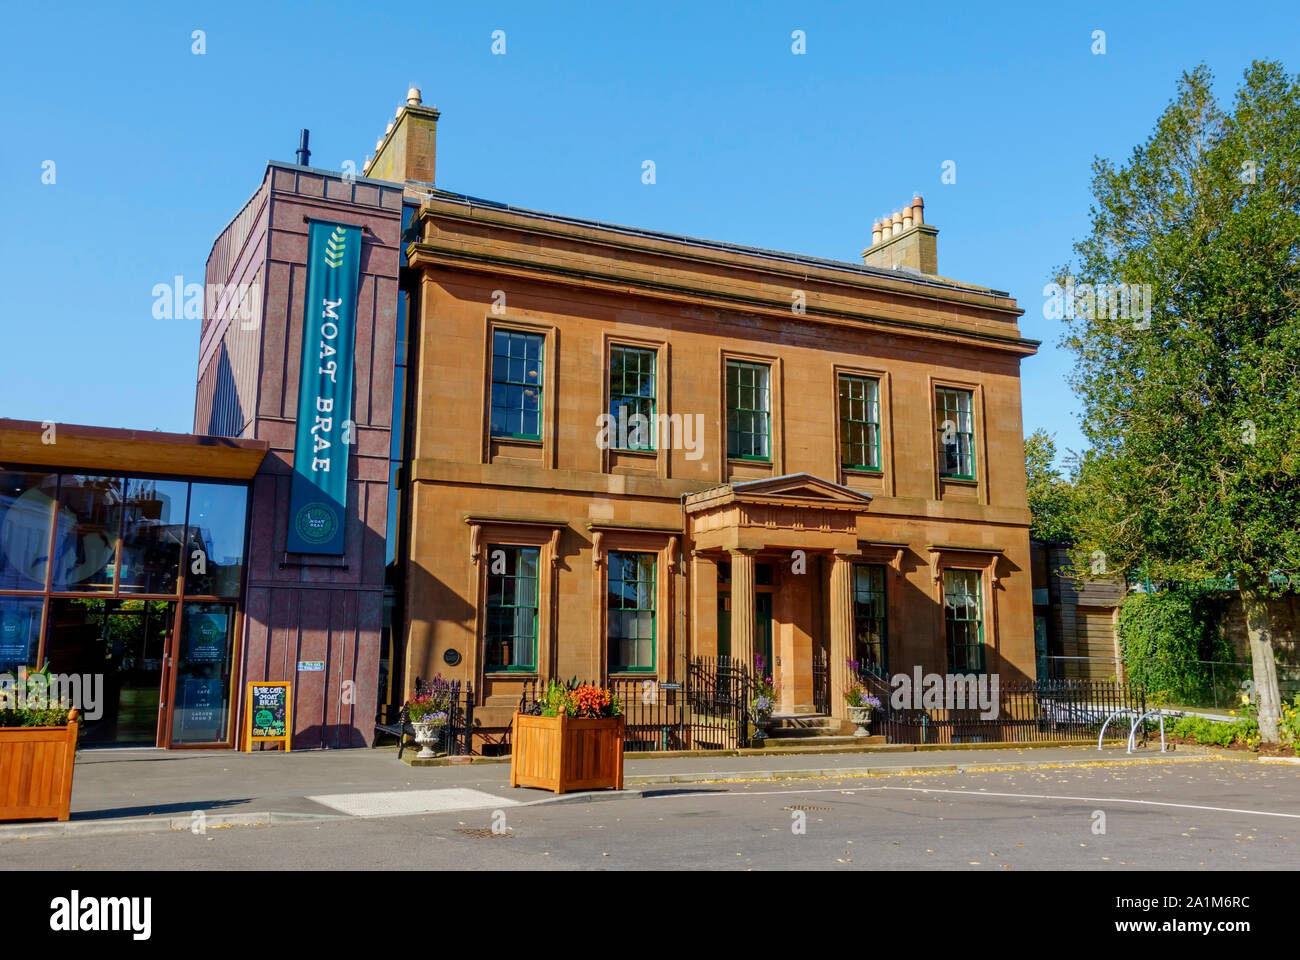 The Moat Brae National Centre for Children’s Literature and Storytelling in Dumfries, South West Scotland. Stock Photo